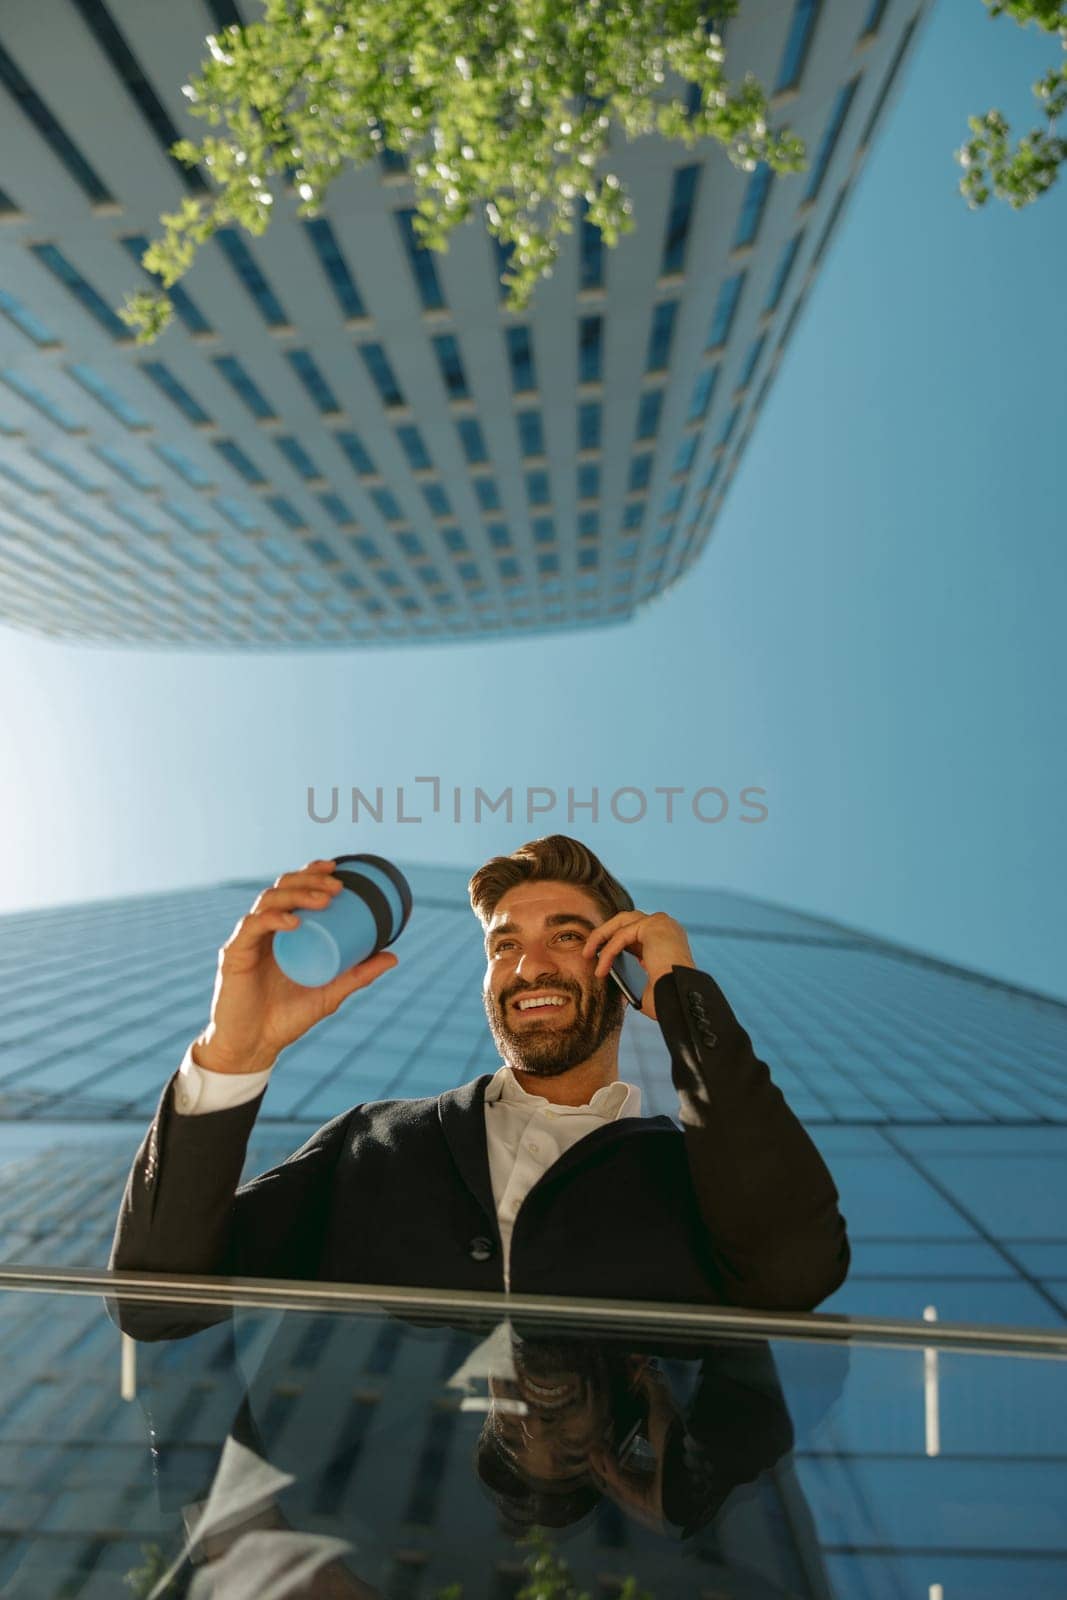 Male manager is talking phone and drinking coffee standing on background of city skyscrapers